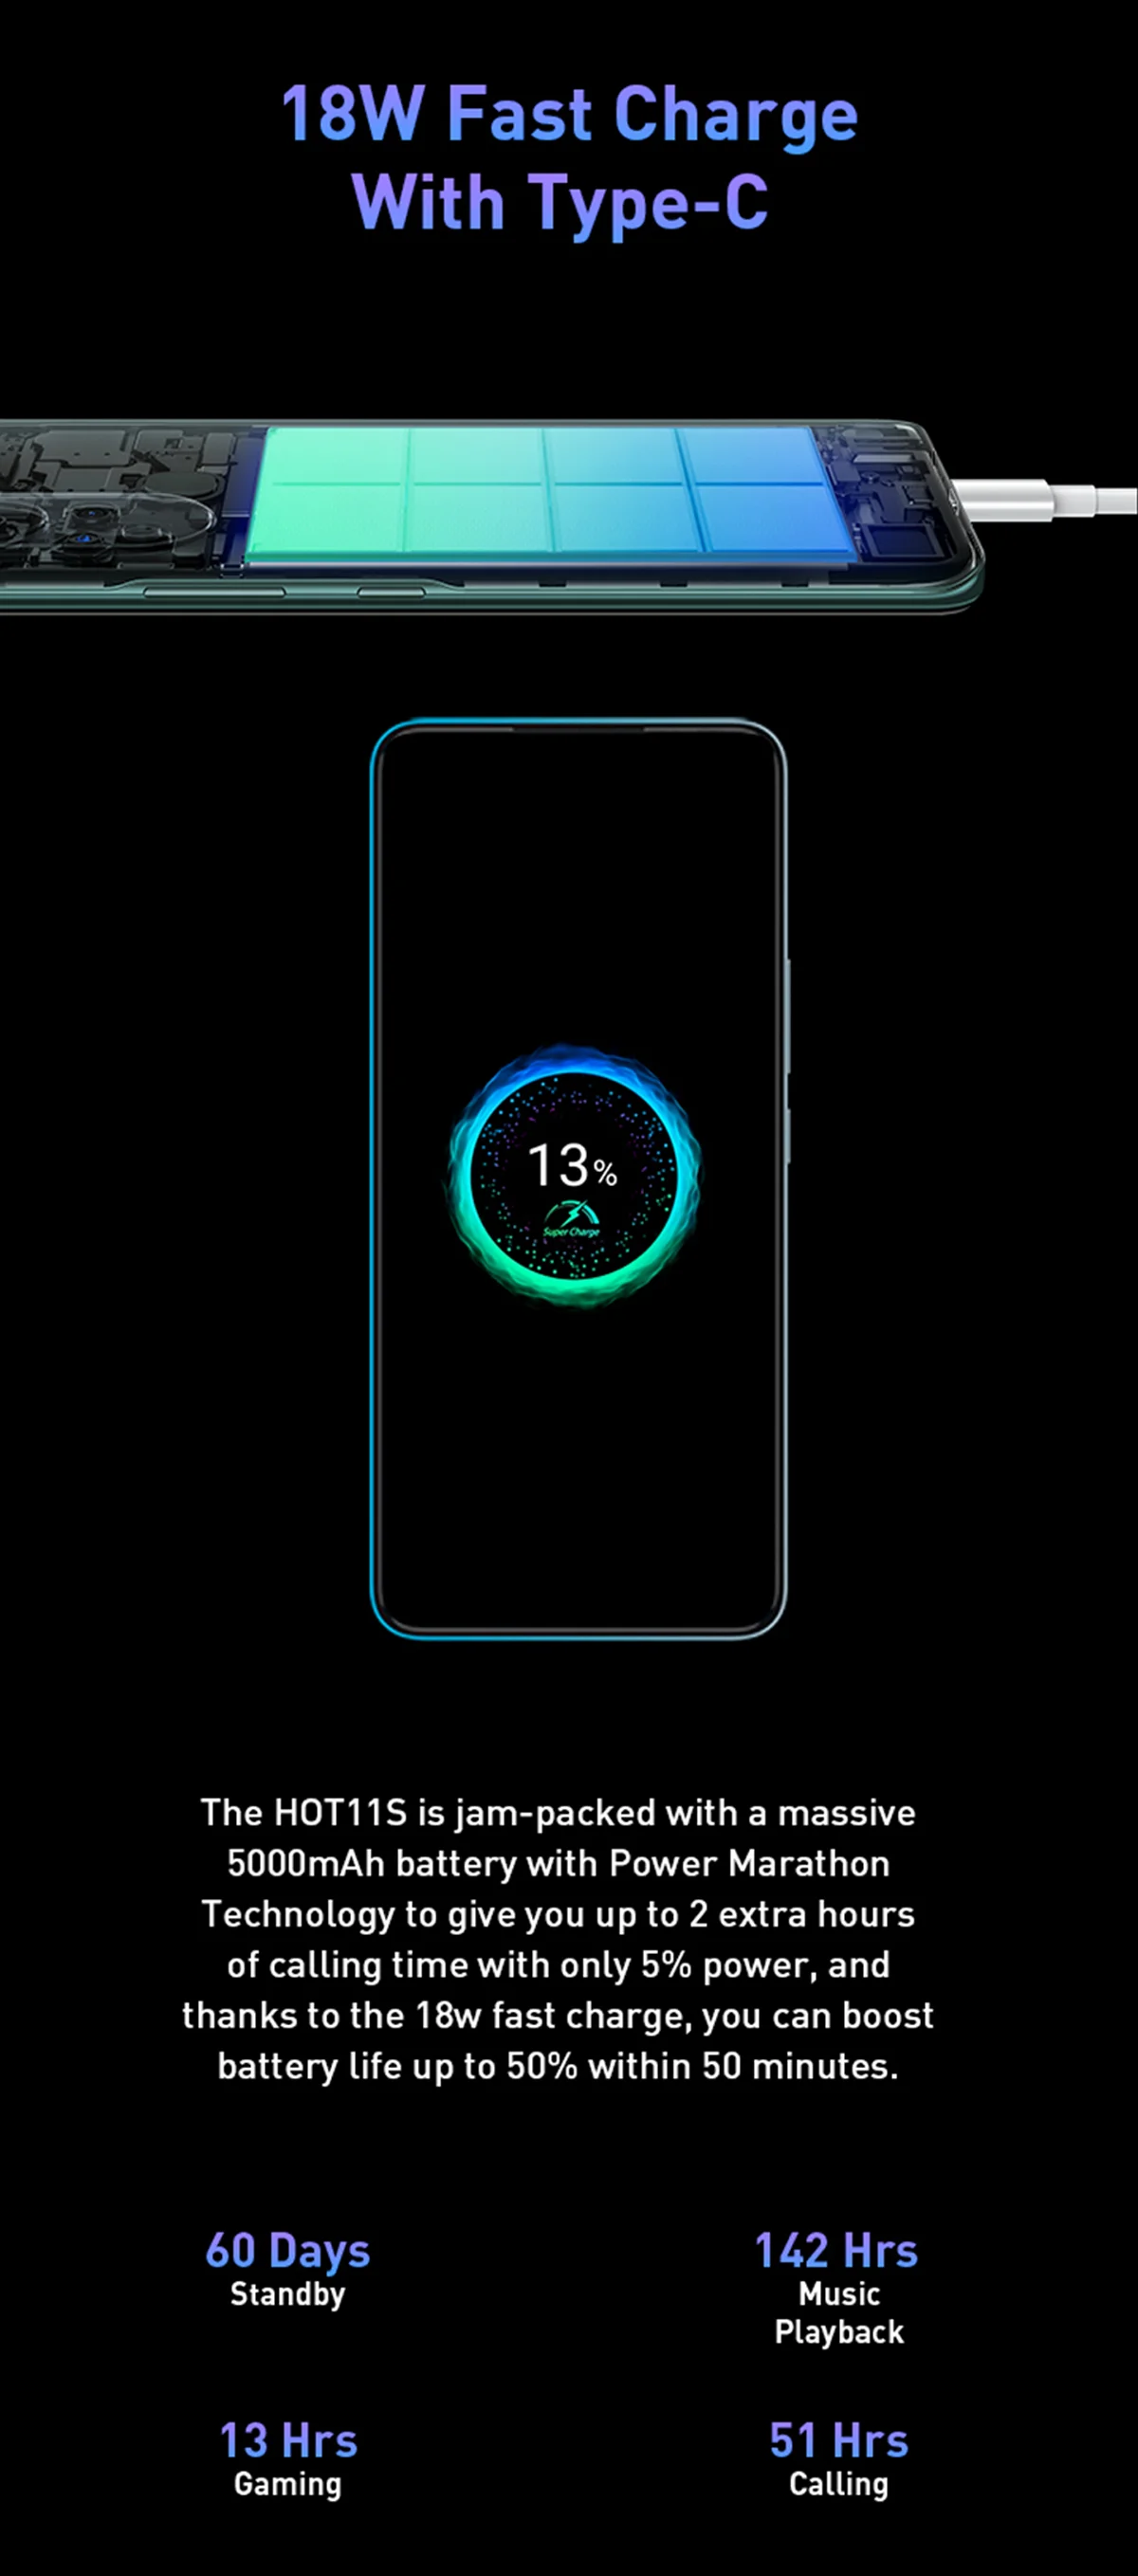 best infinix phone Infinix HOT 11S Helio G88 Smartphone NFC 6.78inch refresh rate 90Hz 5000mAh 18W Charge 50MP Camera Mobile Phone Global Version infinix upcoming mobile